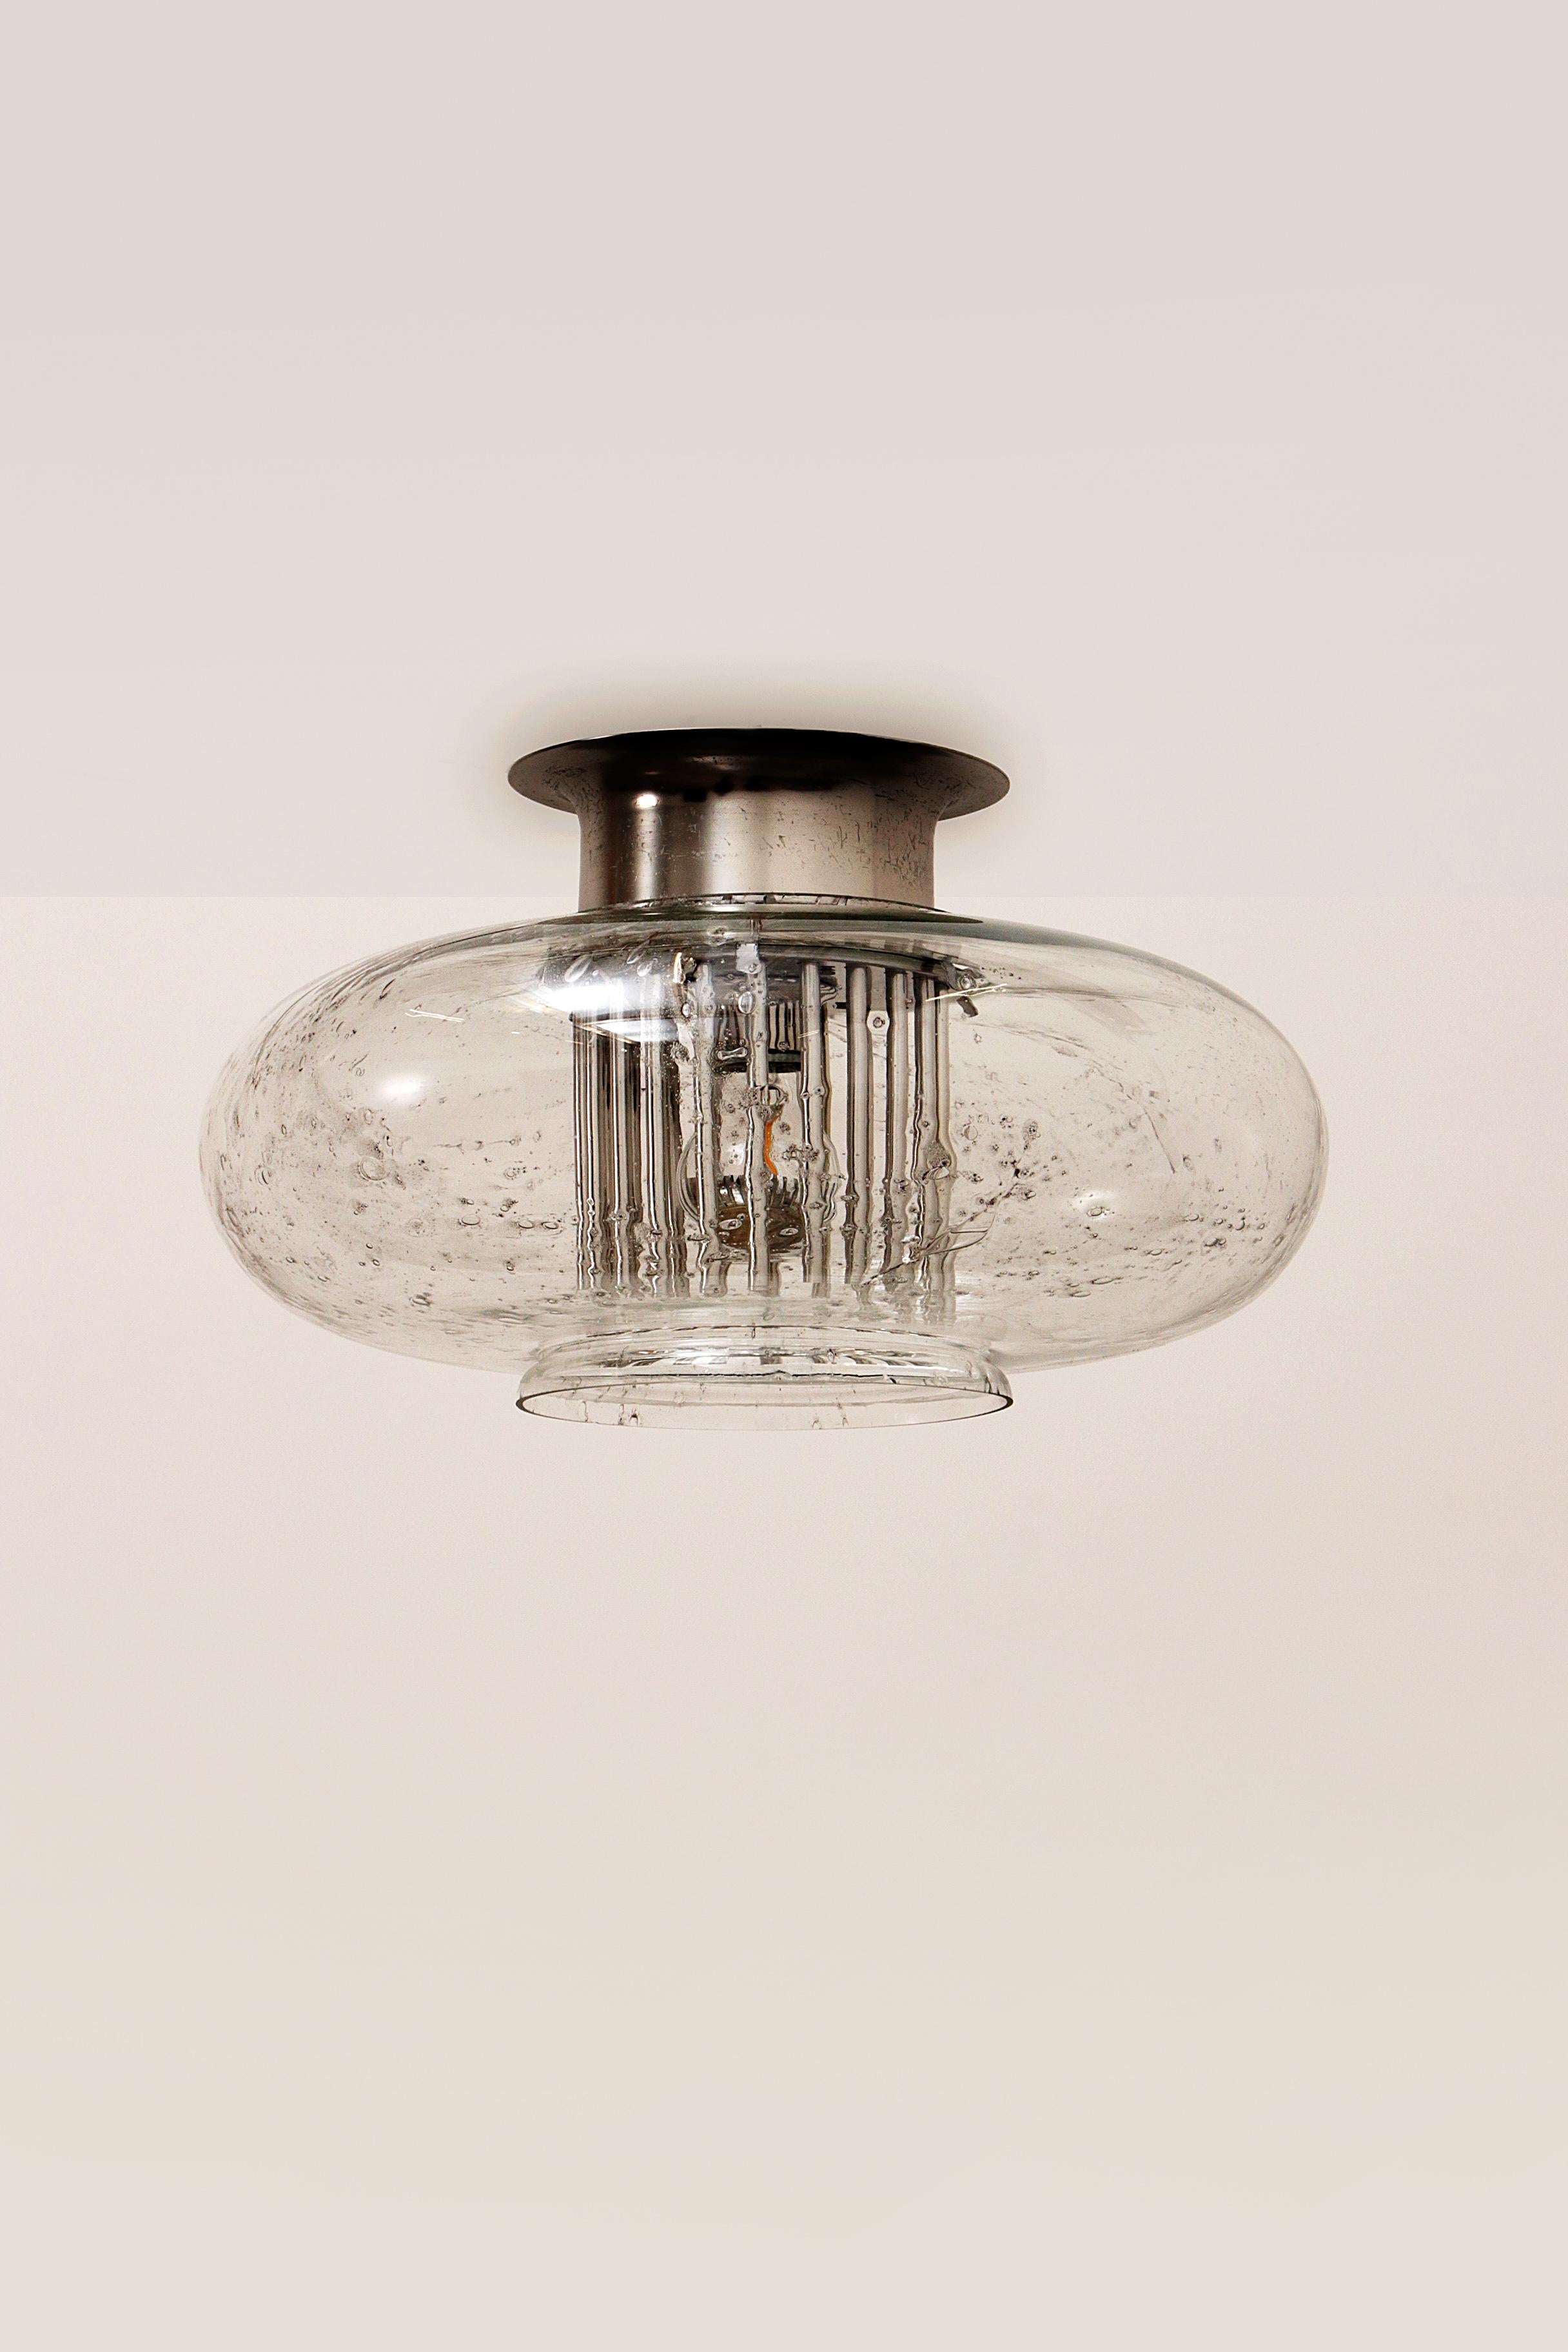 A beautiful round vintage Doria Leuchten ceiling lamp with glass shade of special speckled glass. The glass is of high quality and has a special texture that spreads the light in a beautiful way. Beautifully finished with a chrome ceiling cap and a